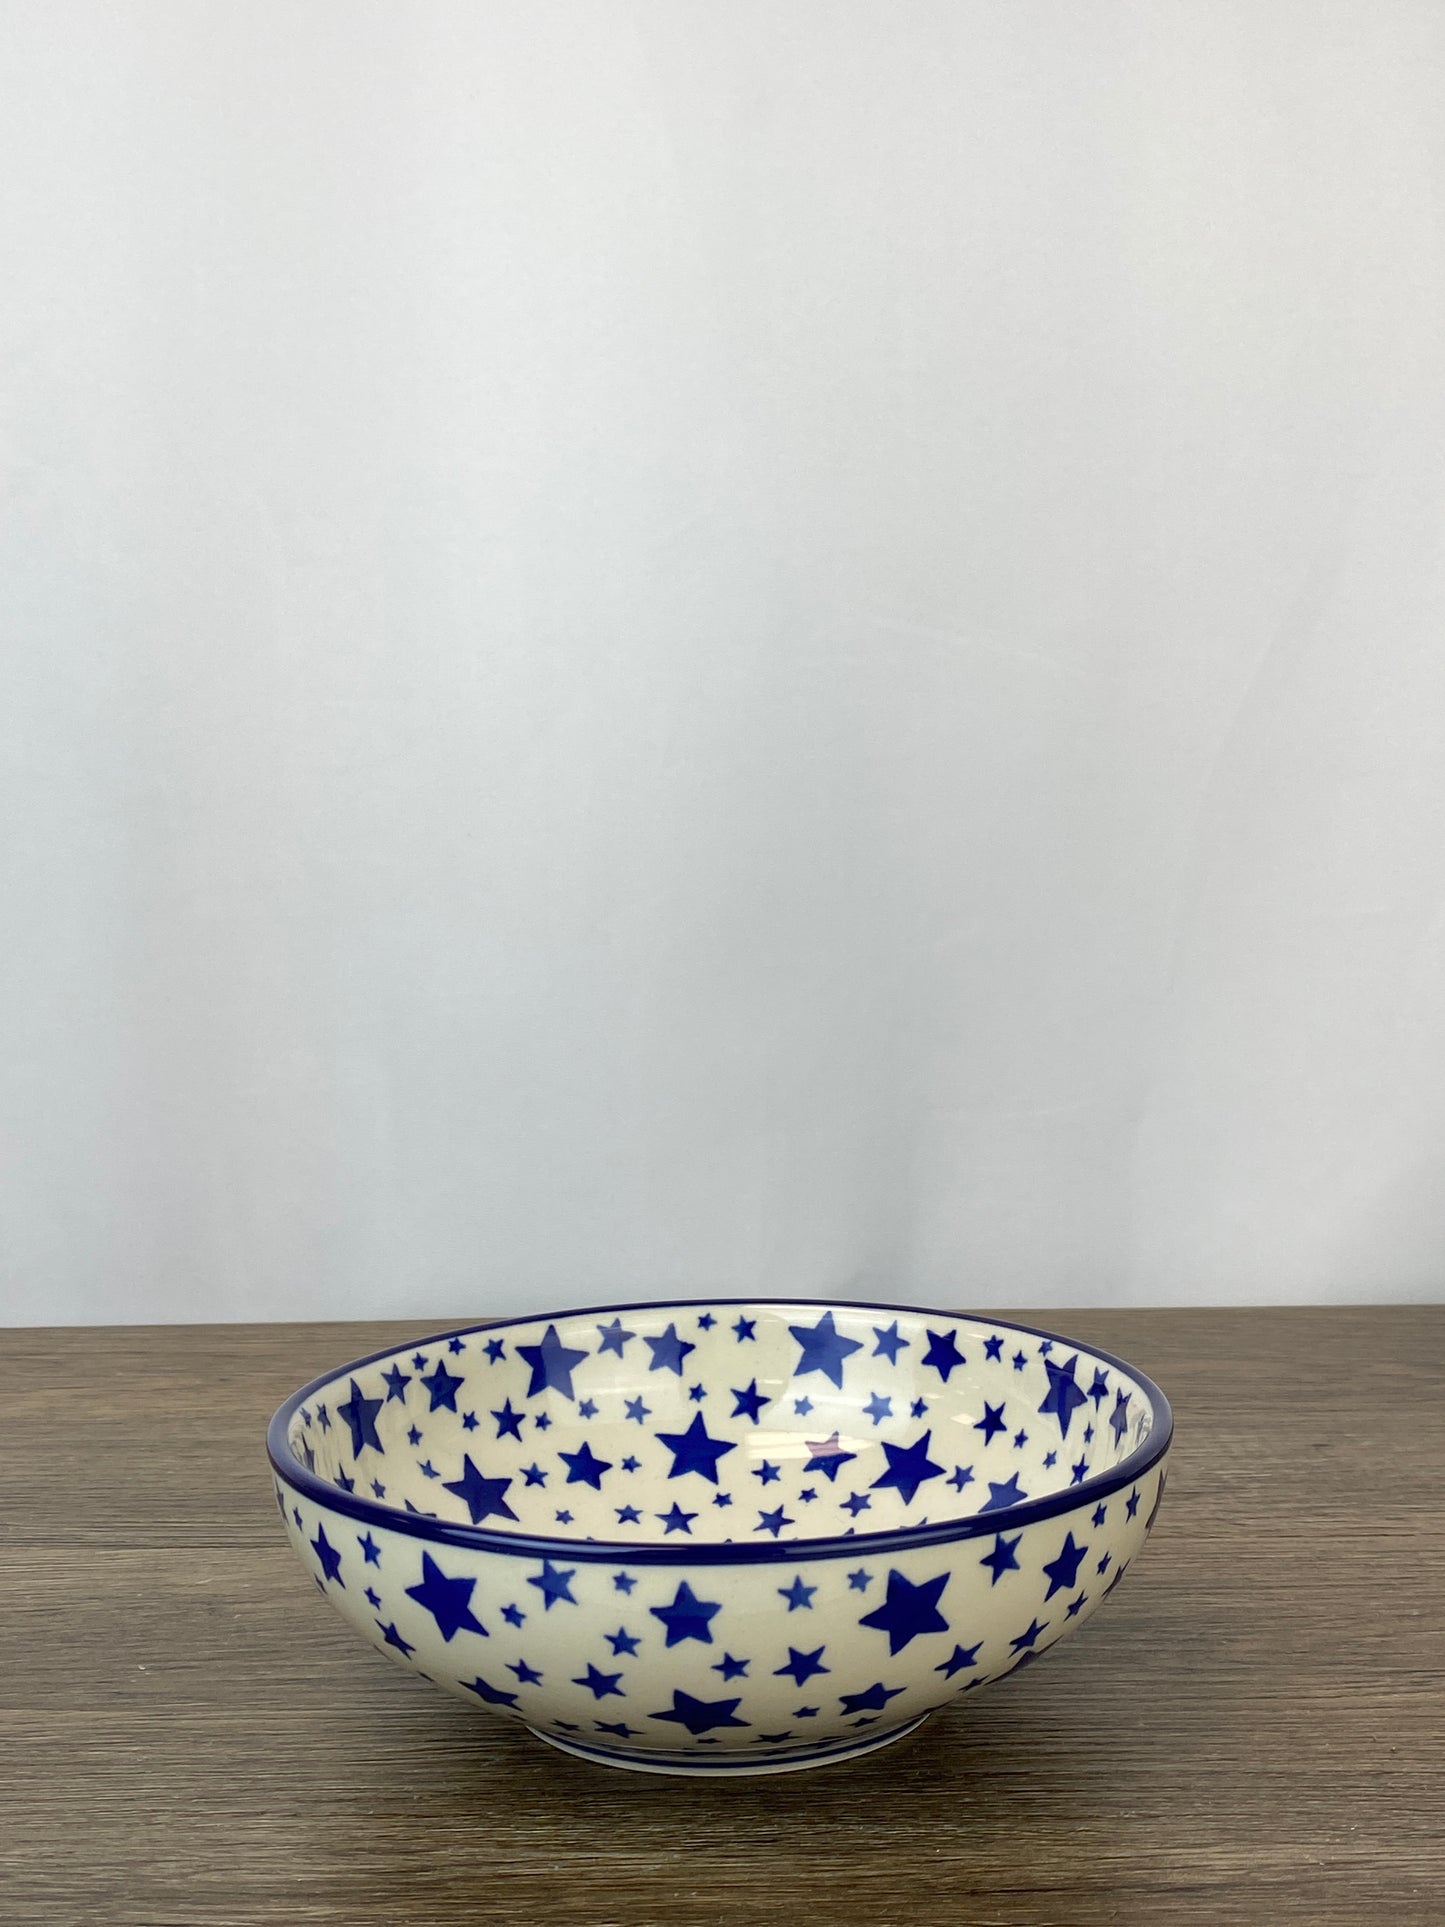 6.5" Cereal / Serving Bowl - Shape B90 - Pattern 359A